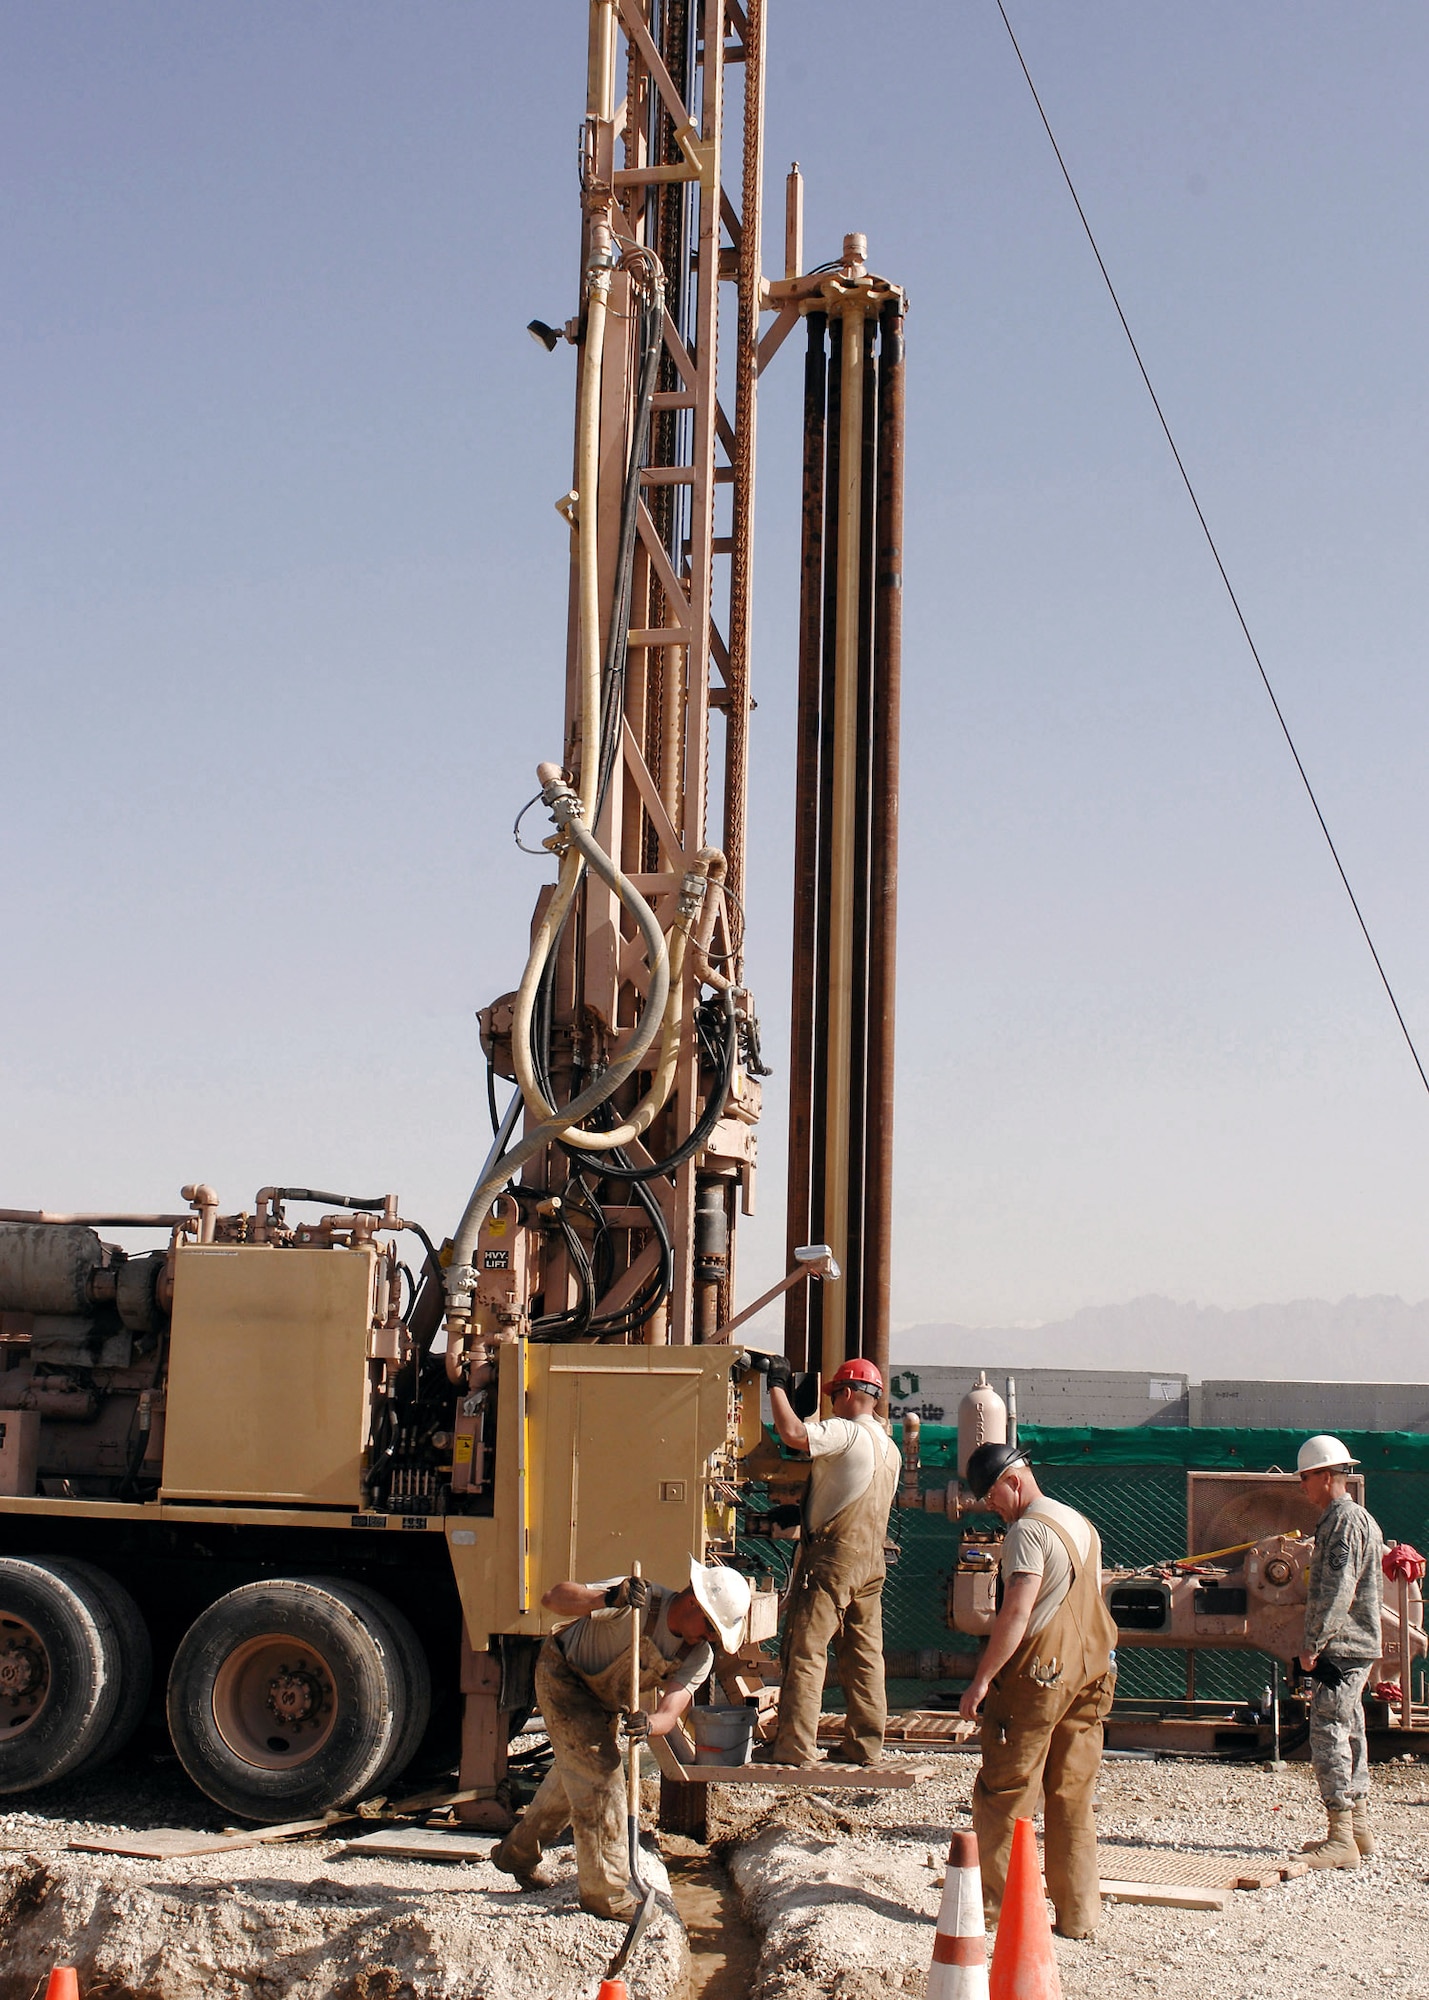 Airmen from the 819th RED HORSE Squadron drill a test hole to operationally check a water-well digging rig March 21 at Bagram Air Base, Afghanistan. More than $400,000 of damage to the rig was repaired at a cost of $80. (U.S. Air Force photo/Master Sgt. Demetrius Lester) 
